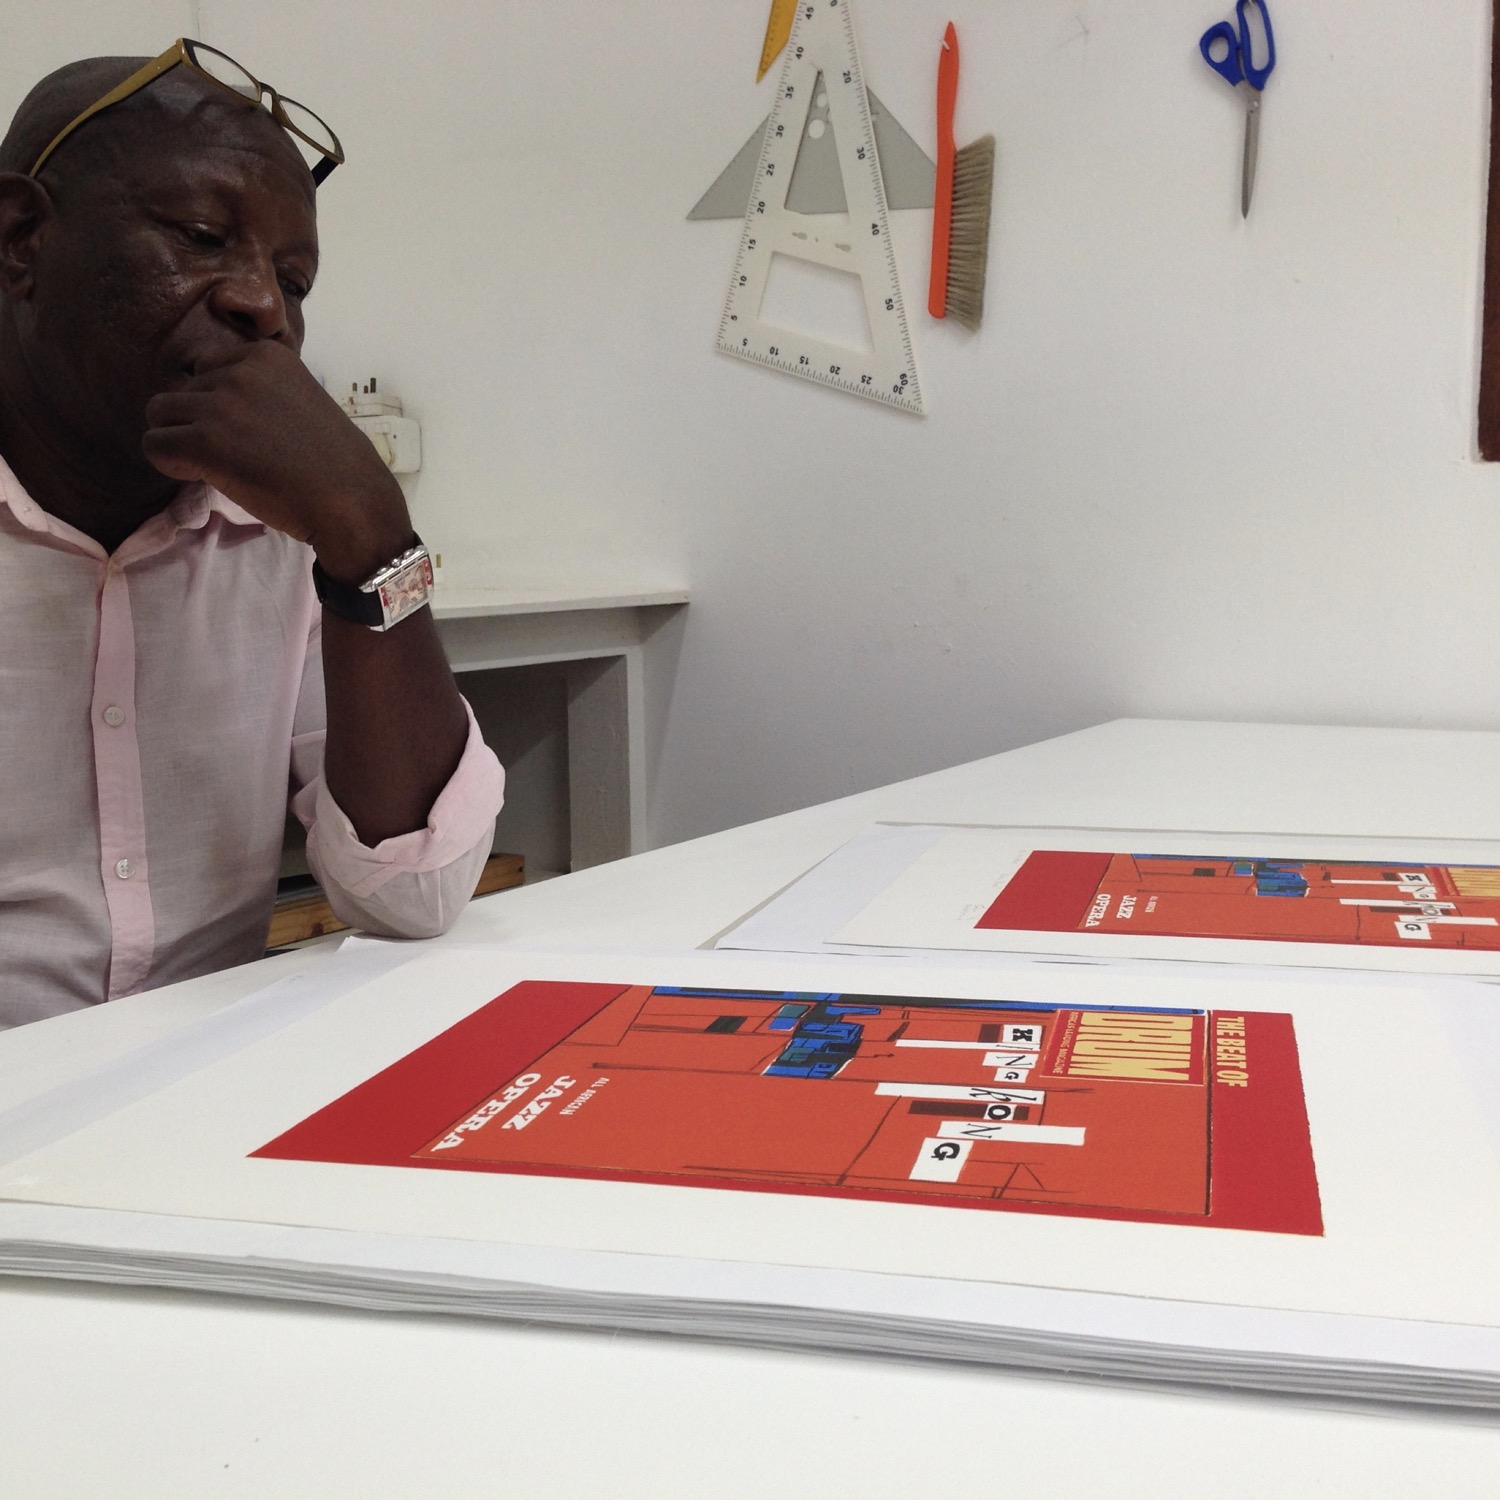 Artist Sam Nhlengethwa sitting at table looking at his limited edition prints  based on Drum Magazine